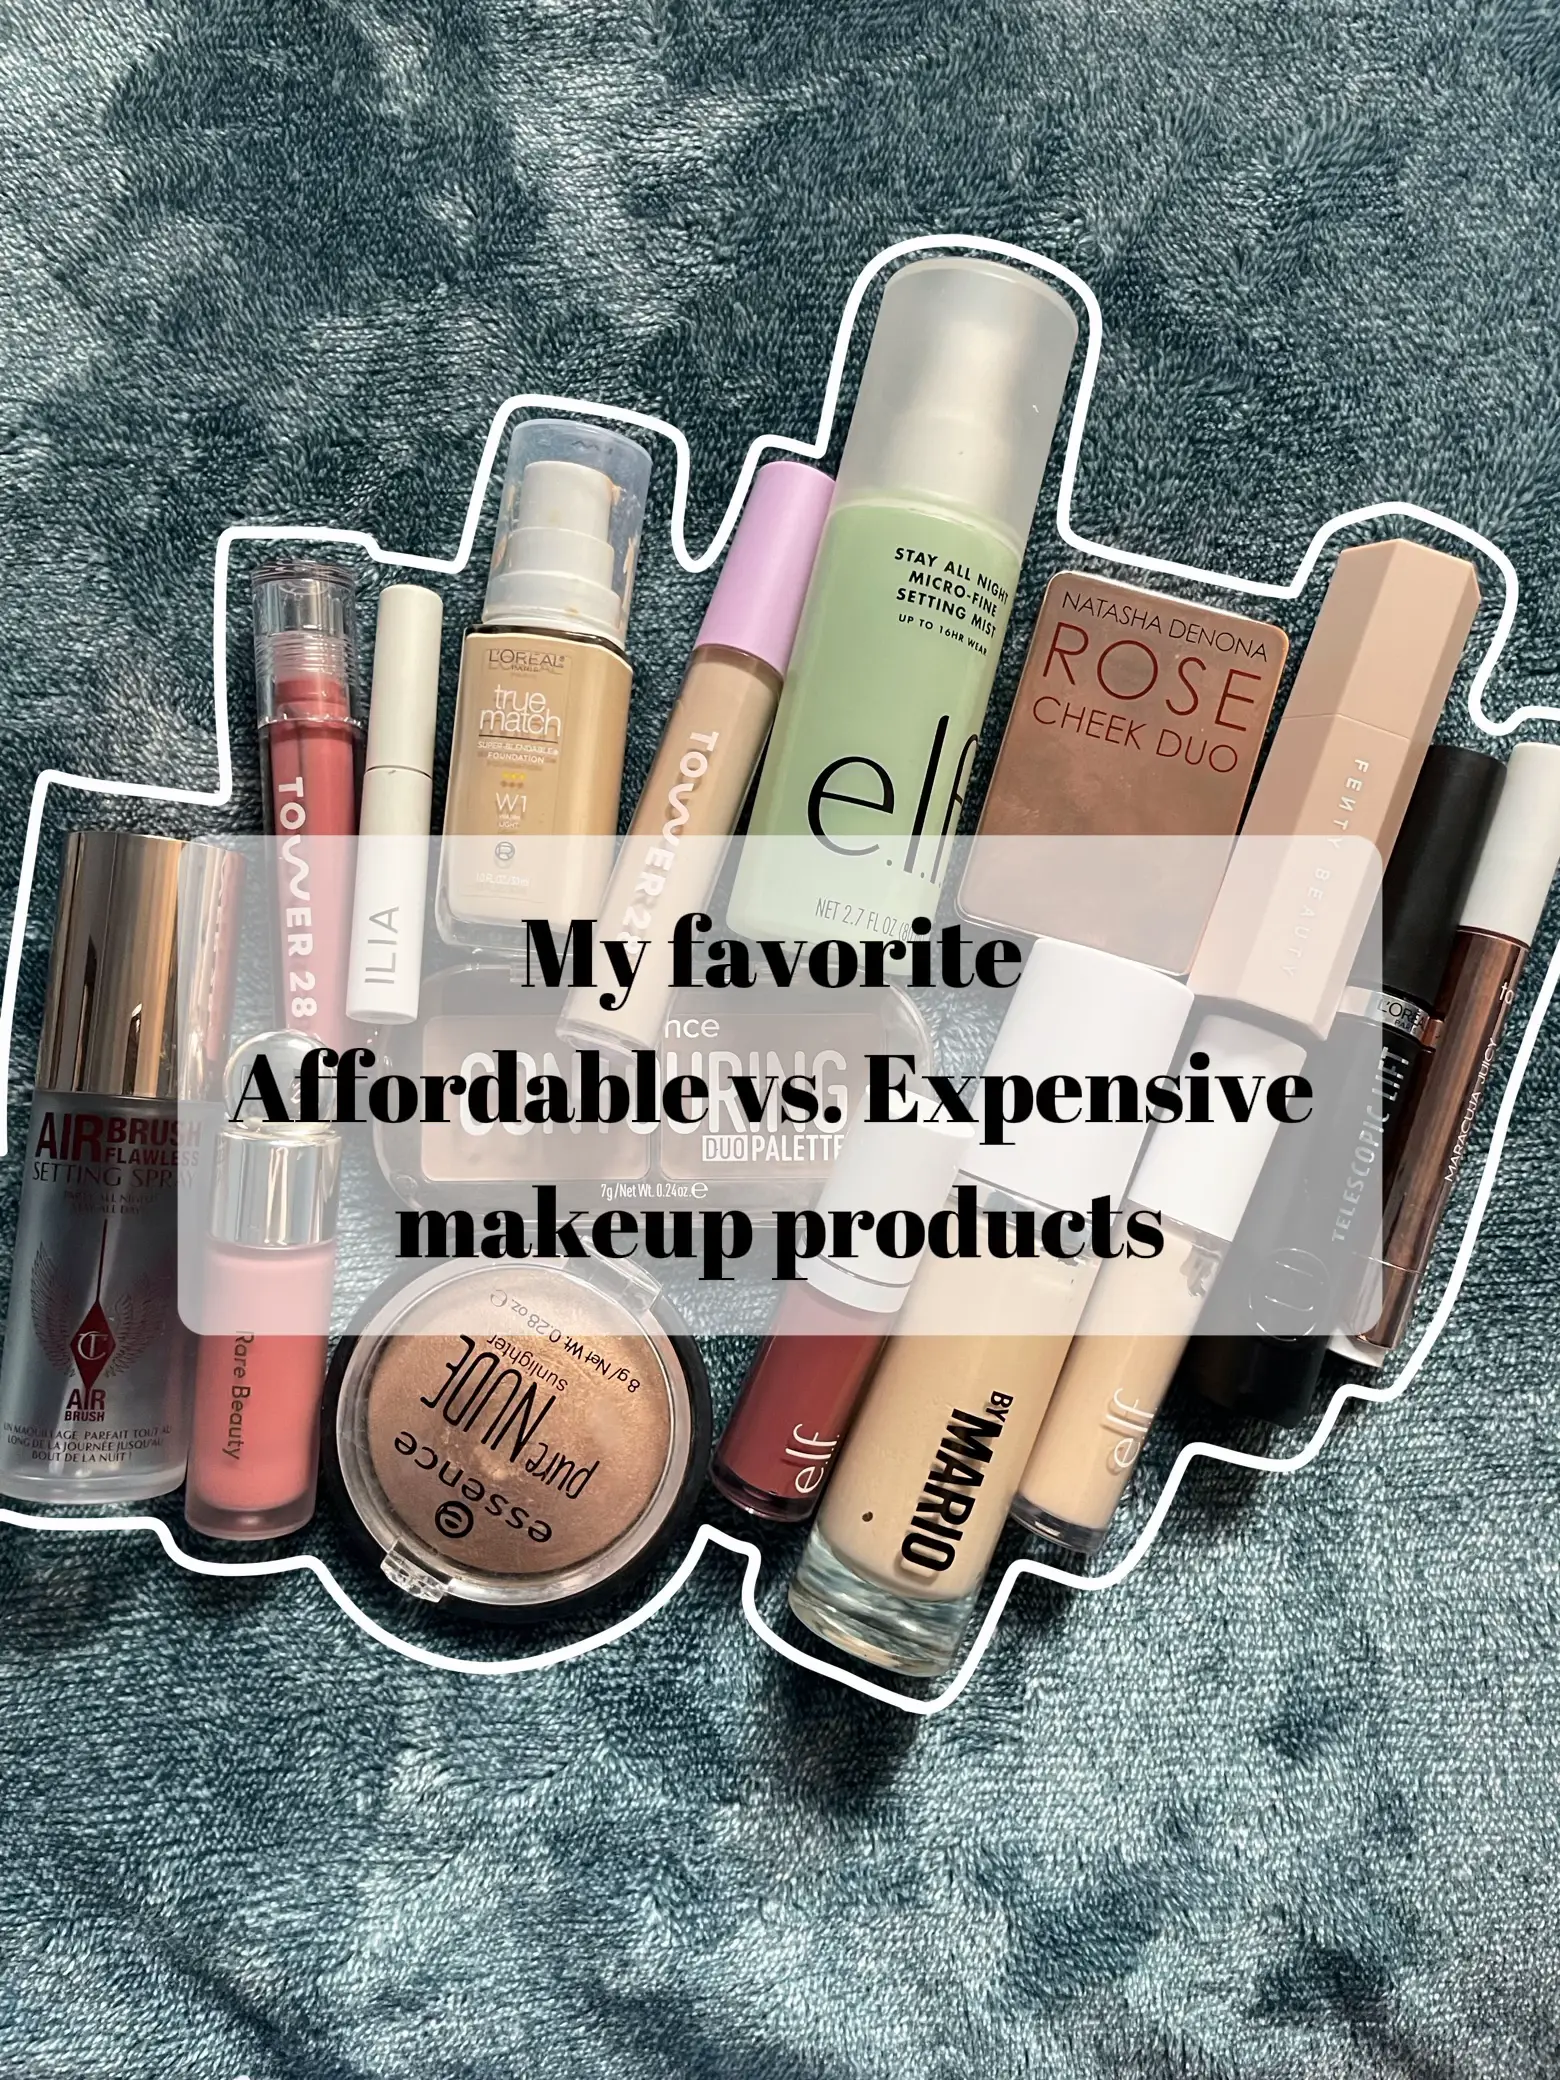 20 Top Makeup Comparison And Review